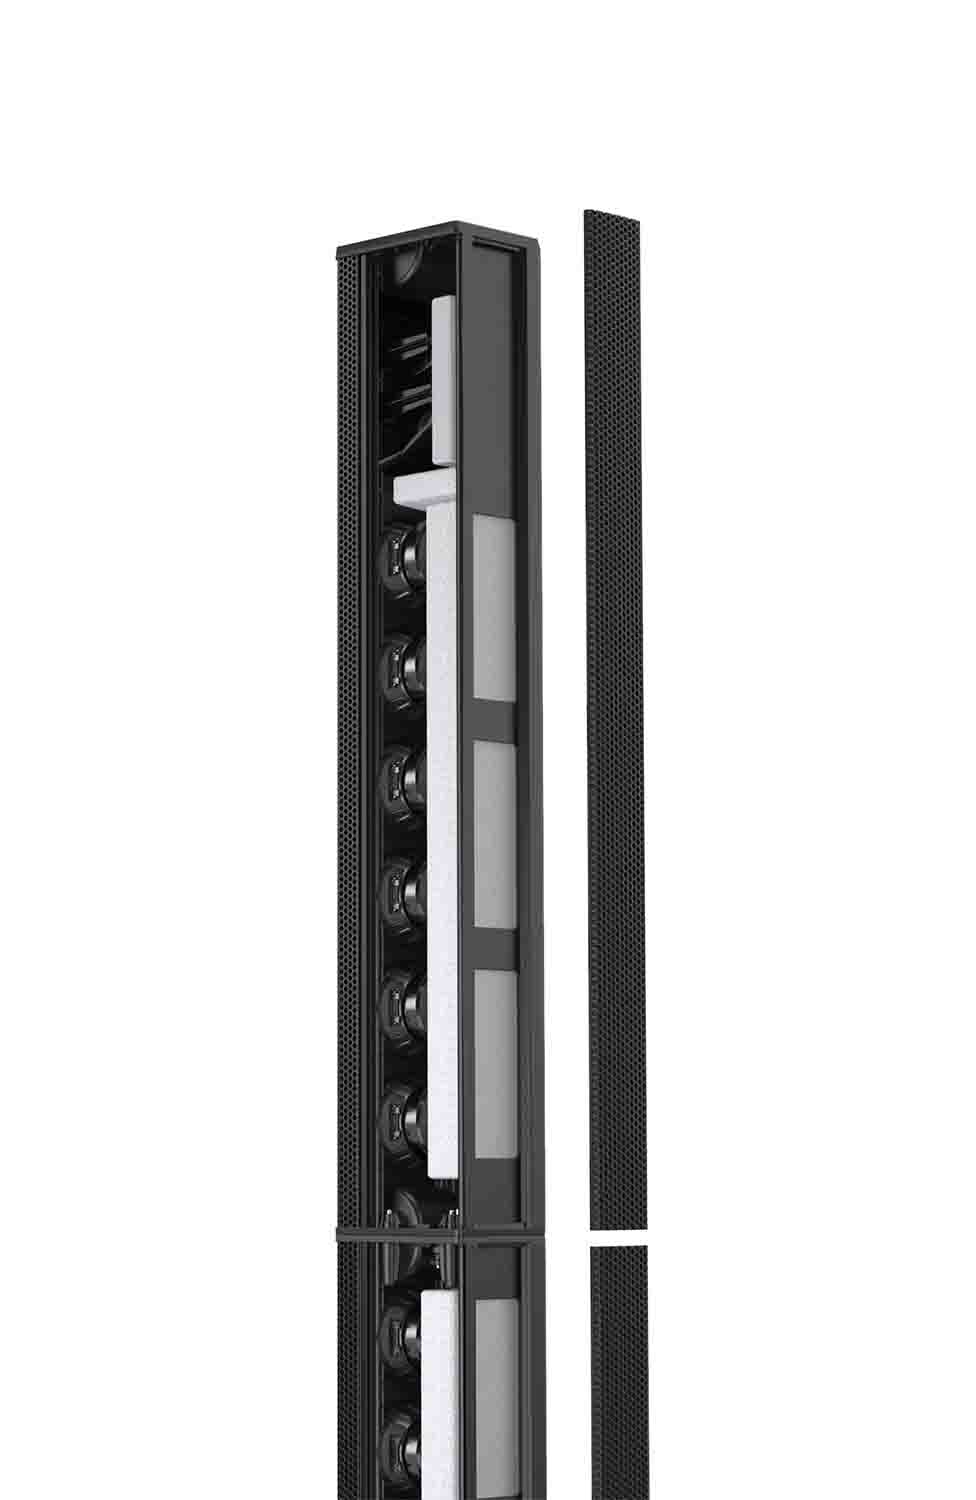 B-Stock: LD System MAUI 28 G3 Compact Cardioid Powered Column PA System - Black by LD Systems